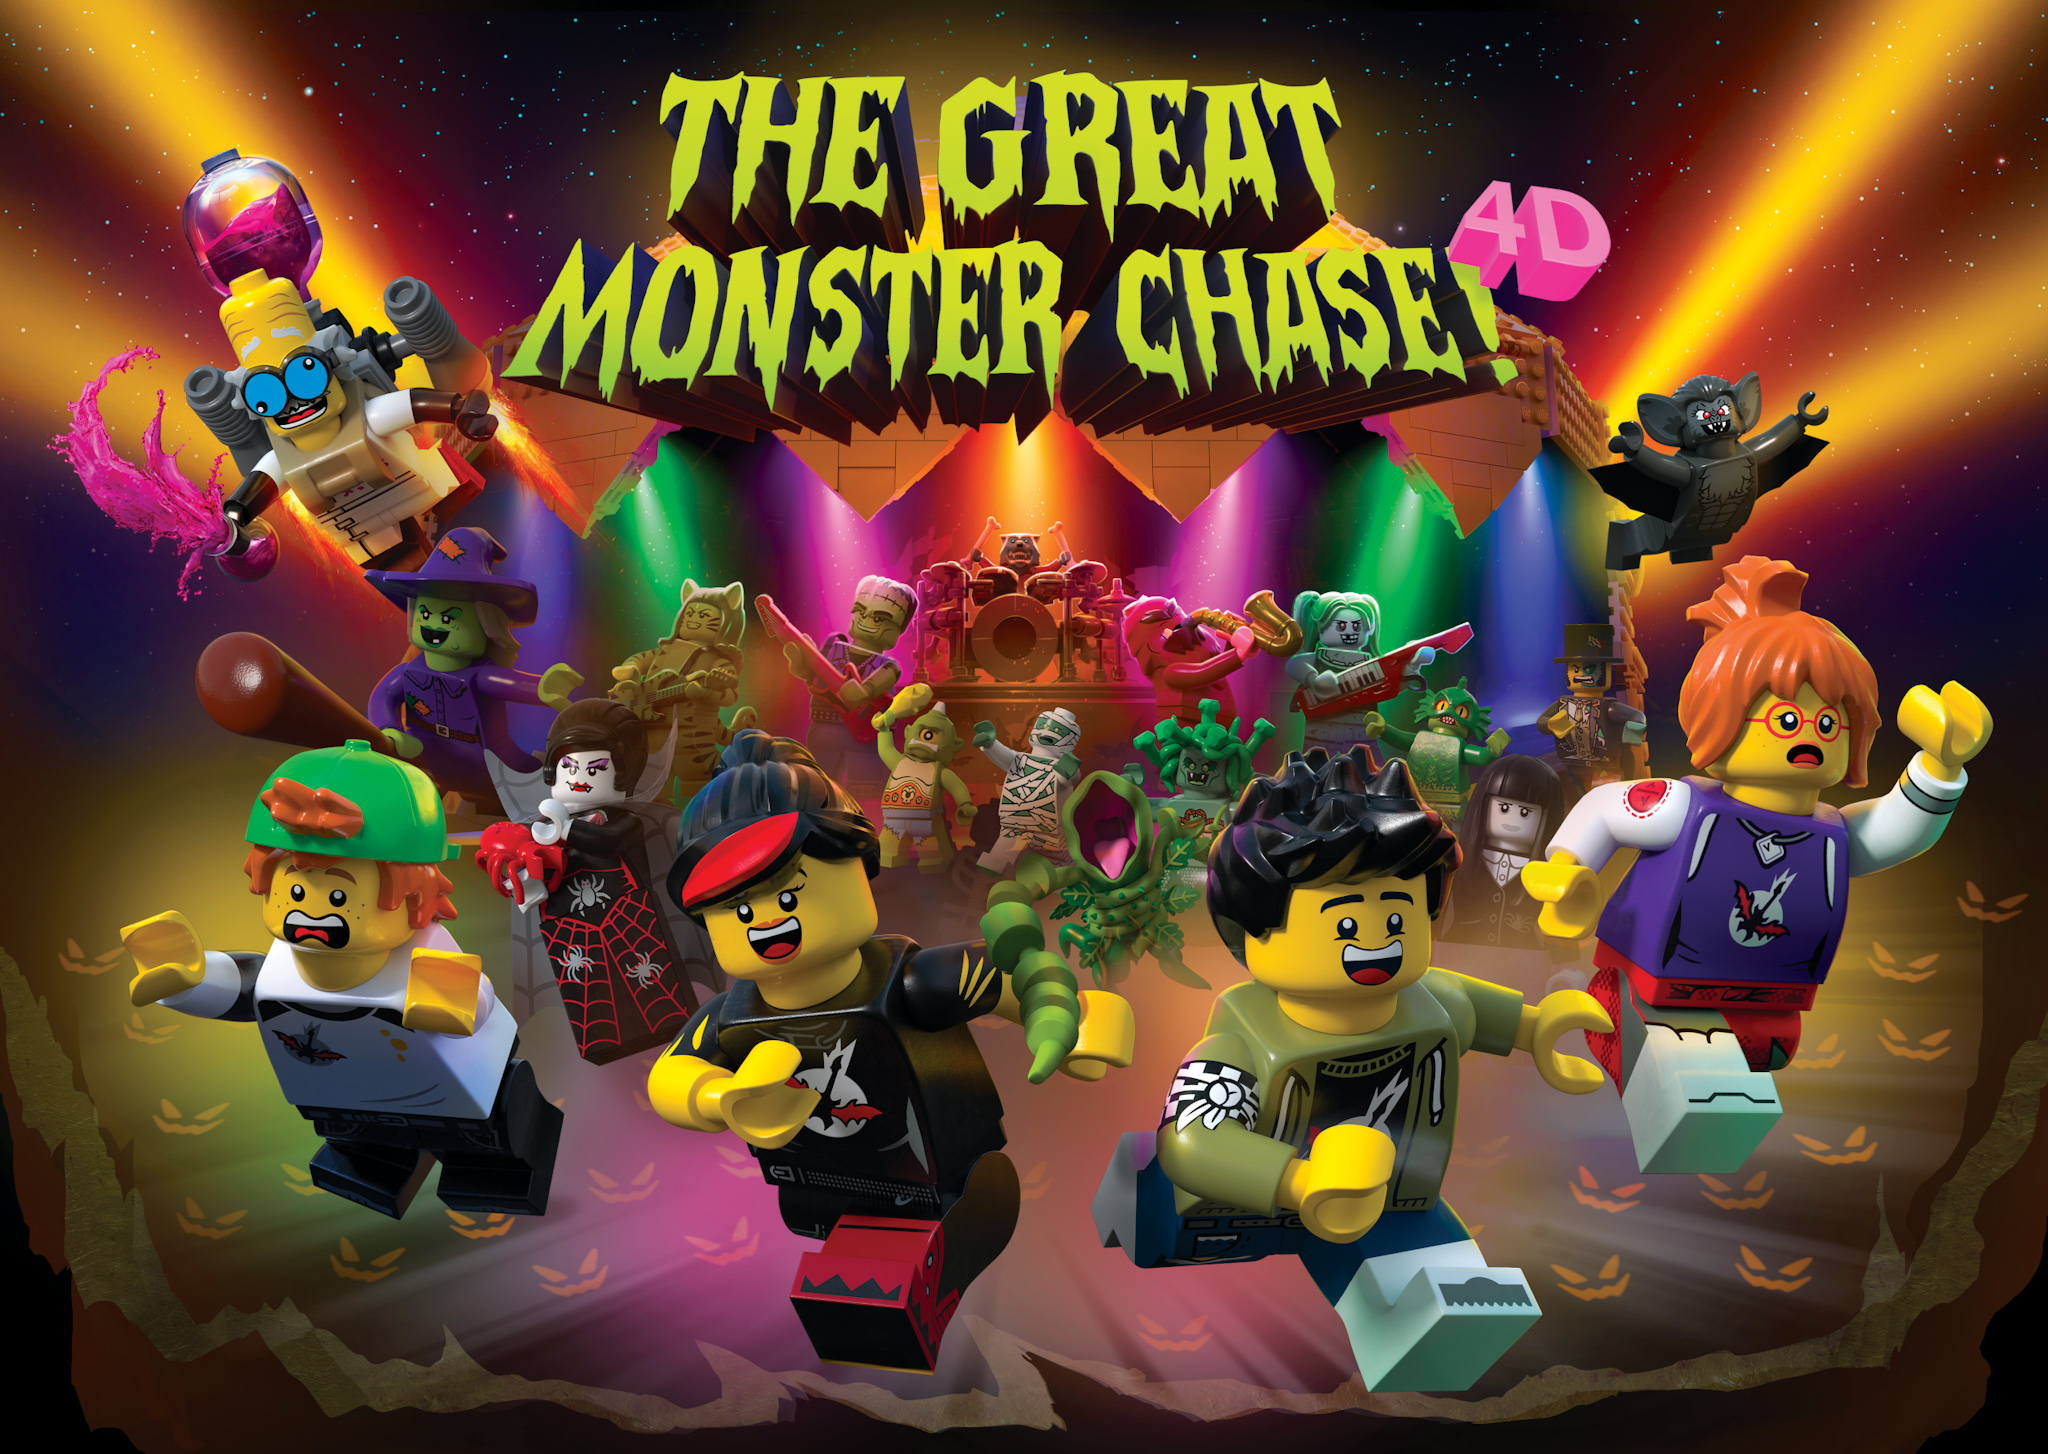 The Great Monster Chase 4D Movie Poster